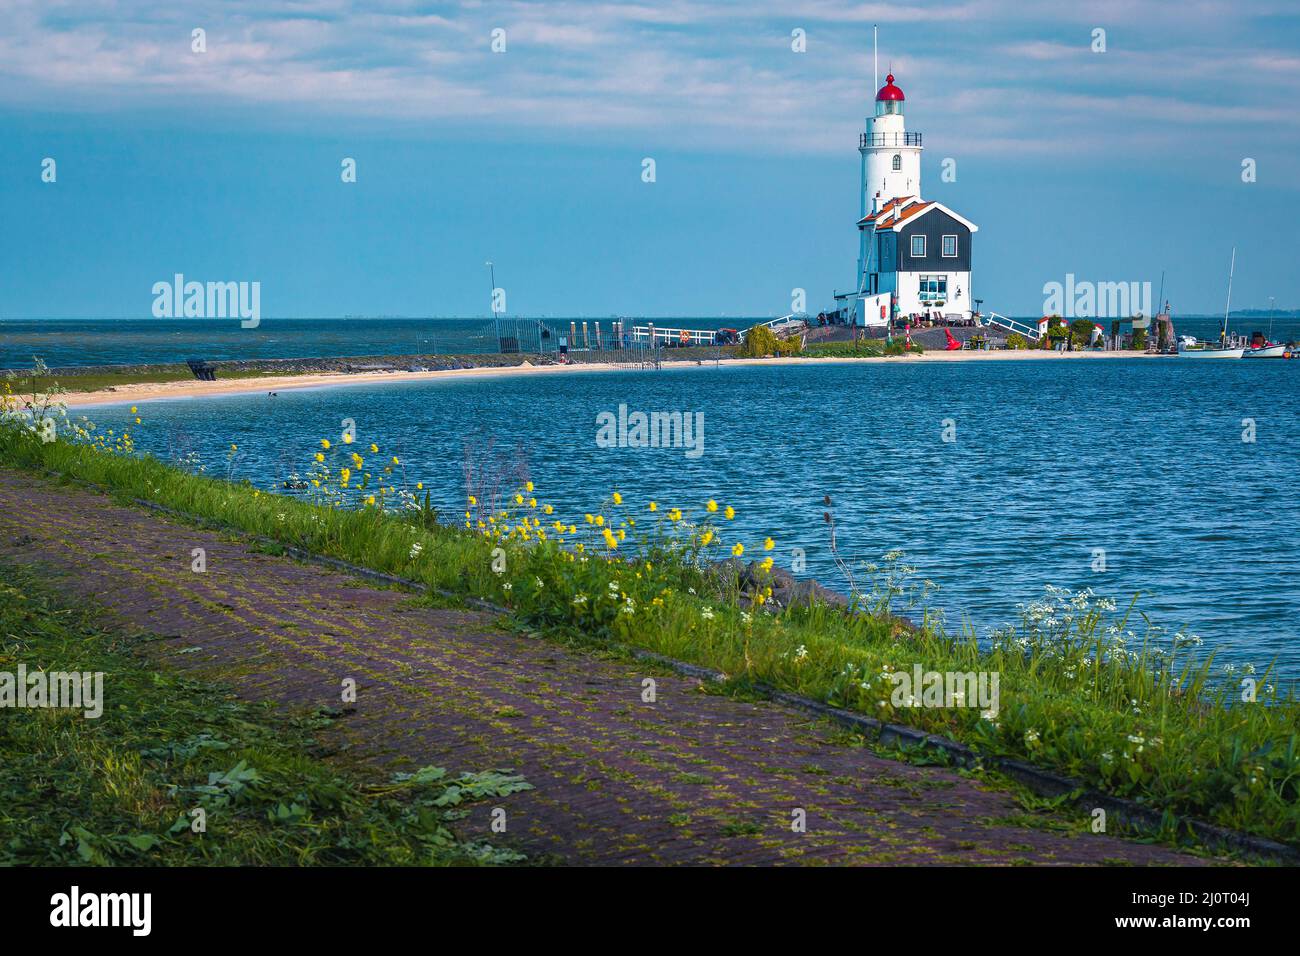 Stunning wooden lighthouse on the peninsula and cozy small harbor, Marken, Netherlands, Europe Stock Photo